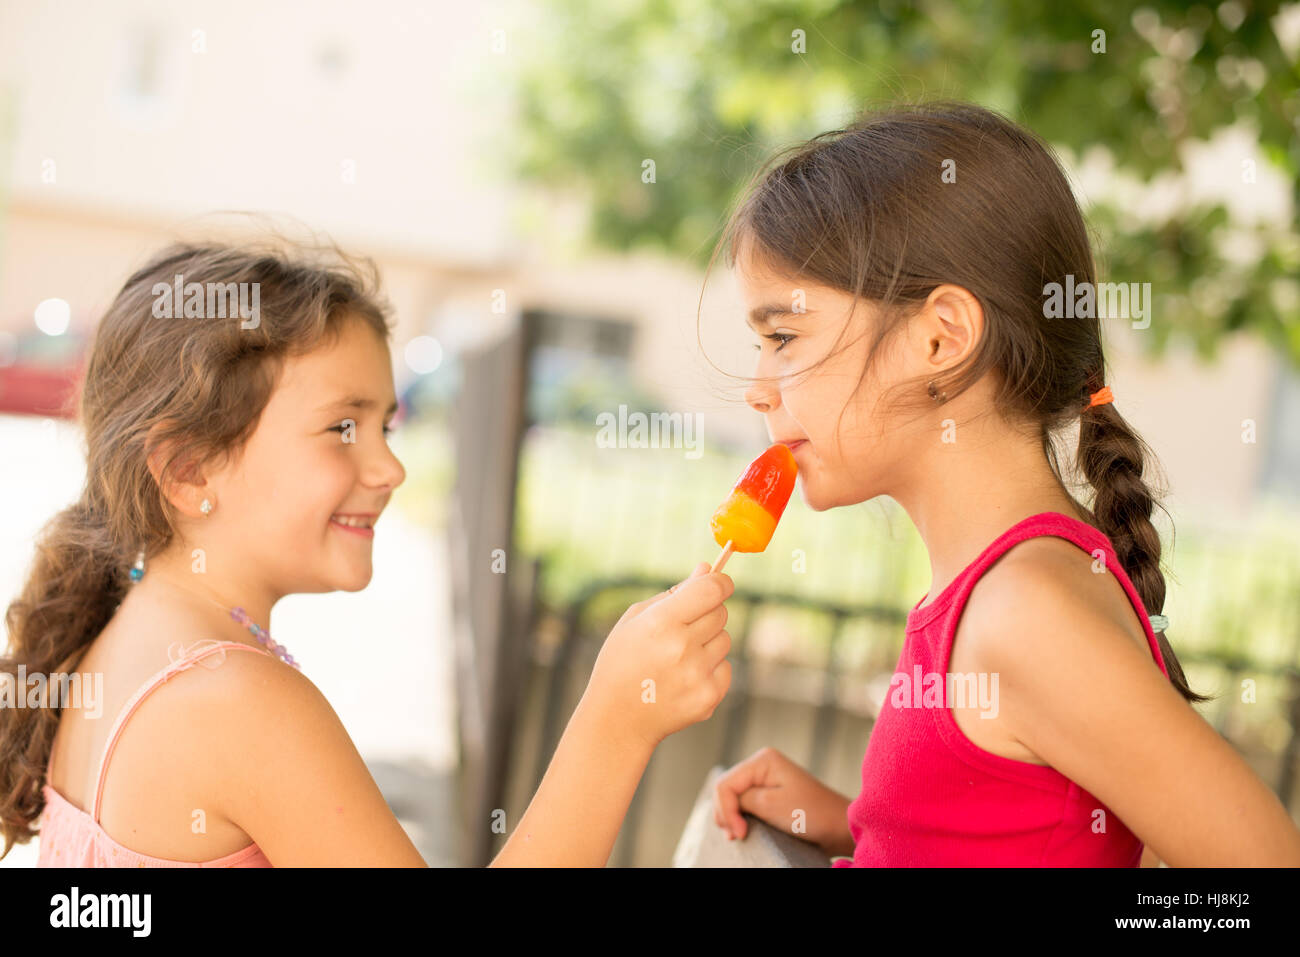 Two girls sharing an ice-lolly Stock Photo